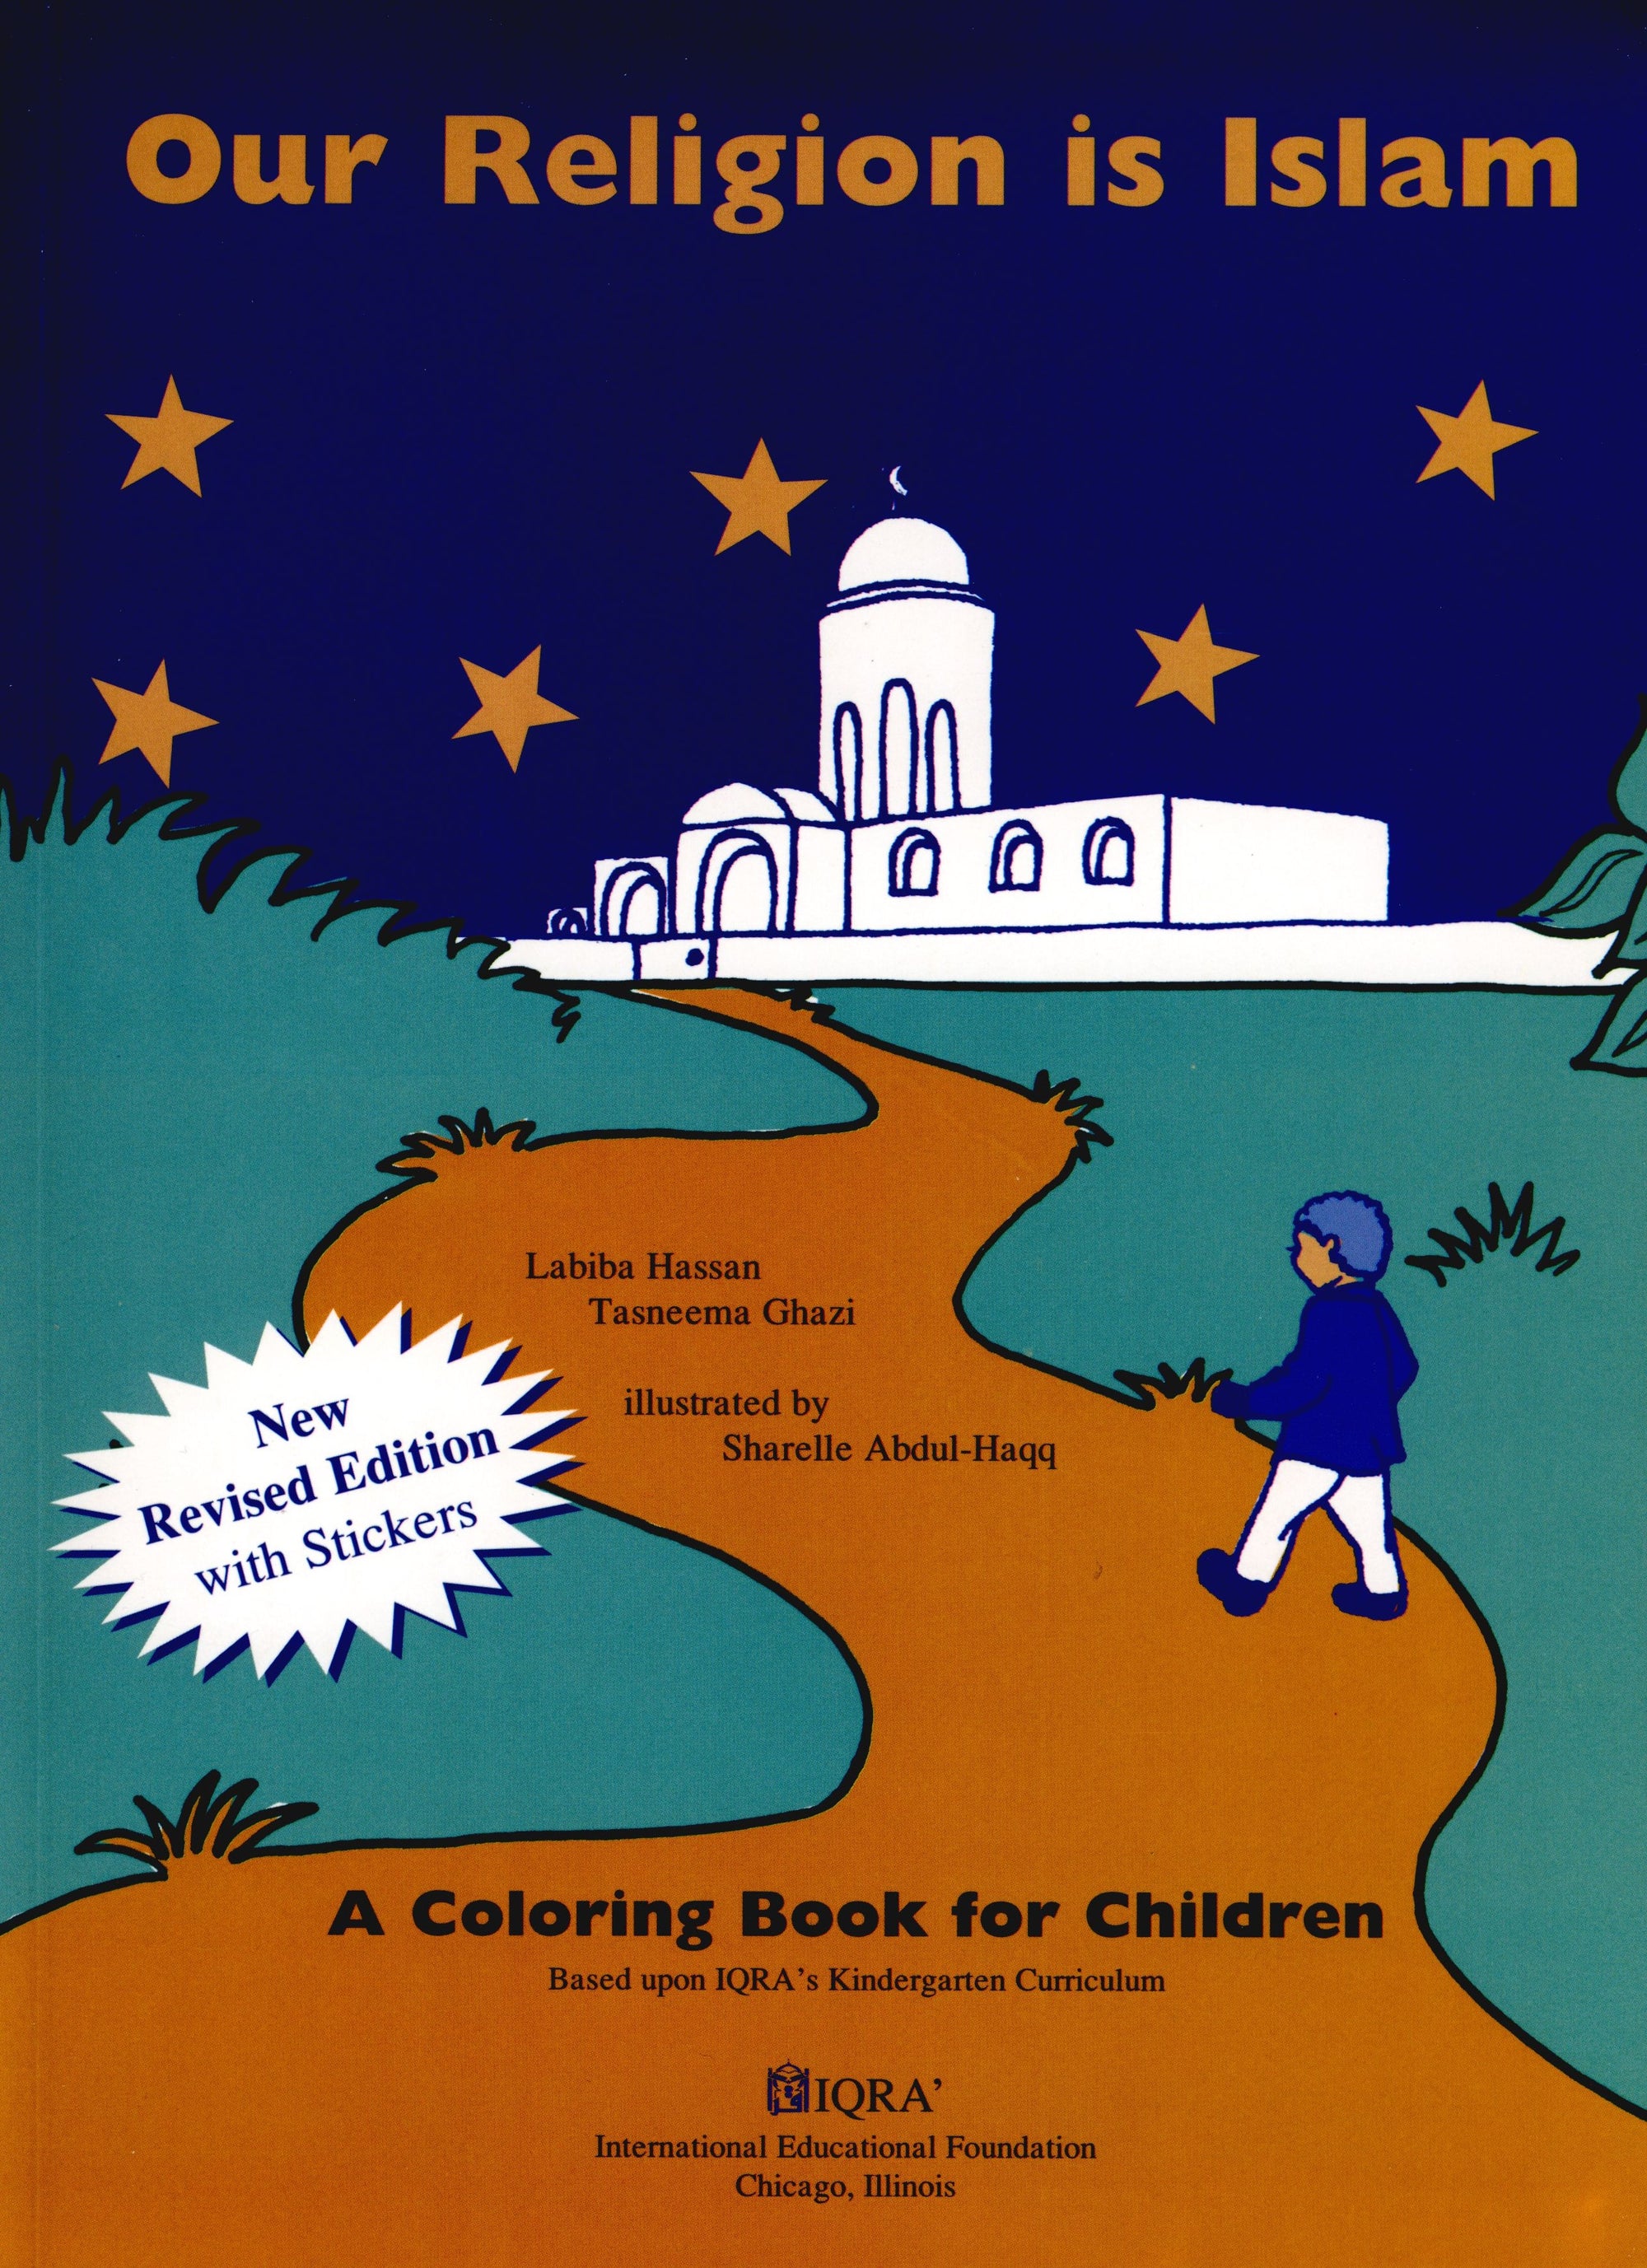 Our Religion is Islam: A Coloring Book